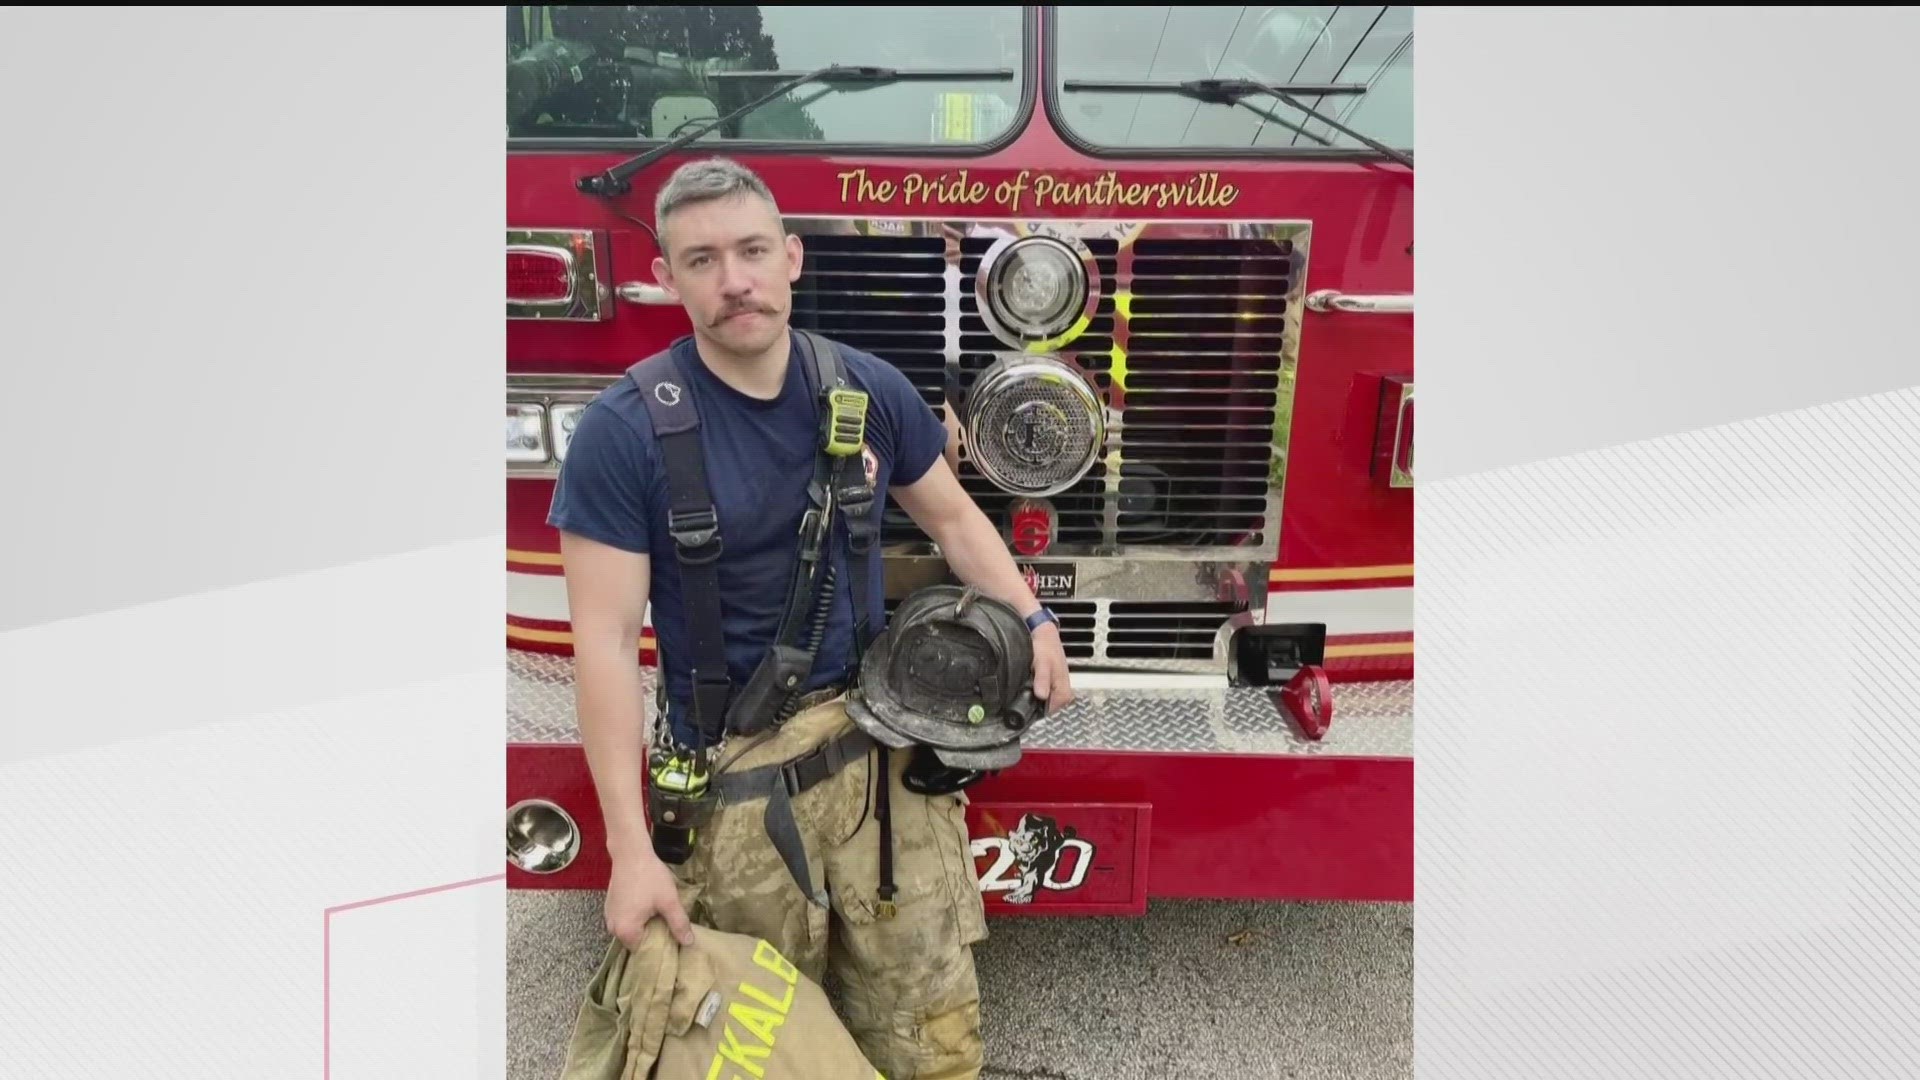 DeKalb County firefighter Peter Le was diagnosed with cancer several months ago. On Wednesday, he was back in action.